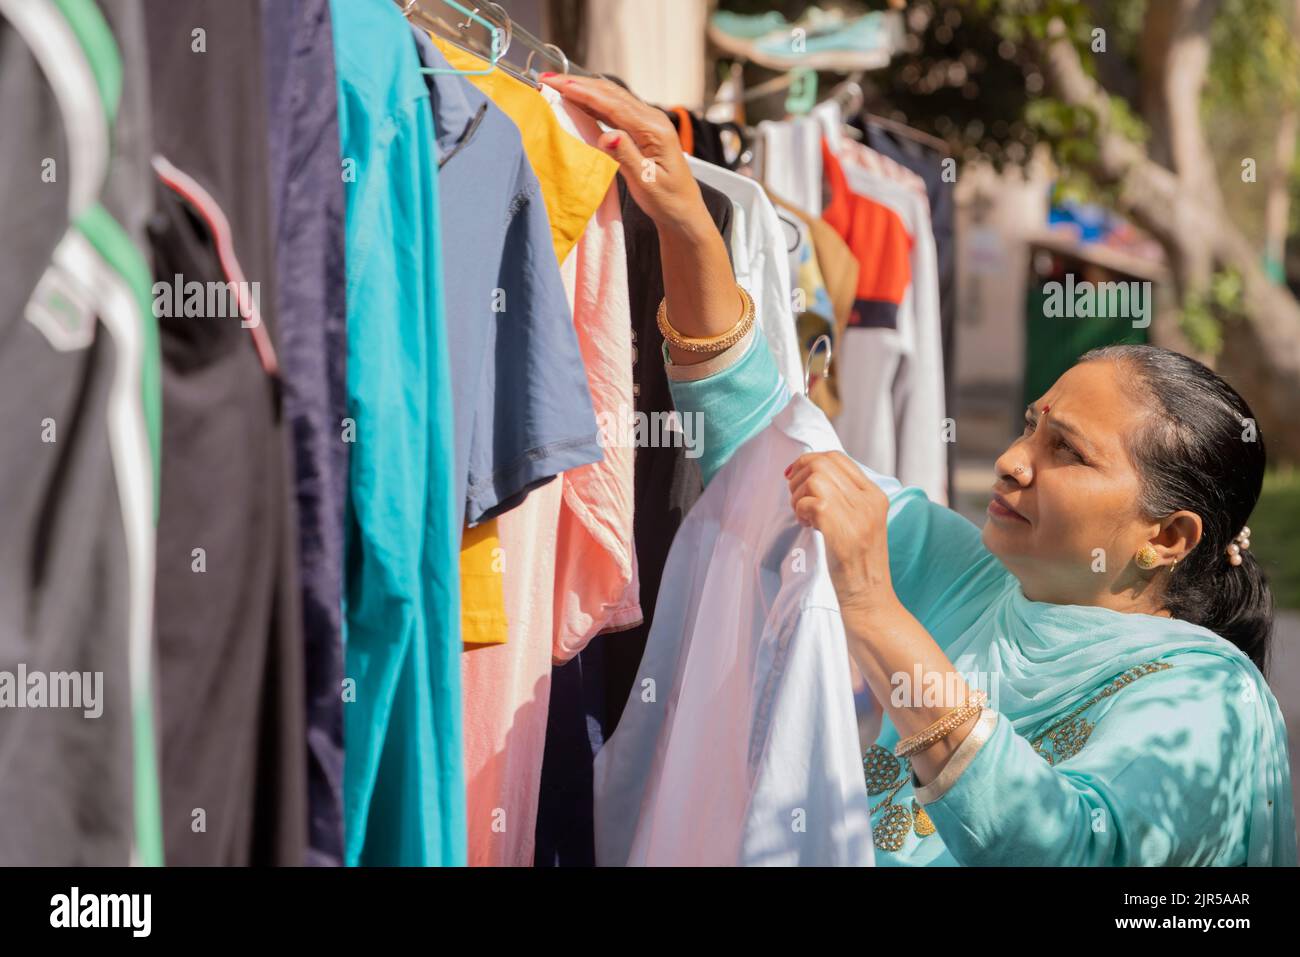 Senior woman hanging clothes on washing line to dry outside Stock Photo